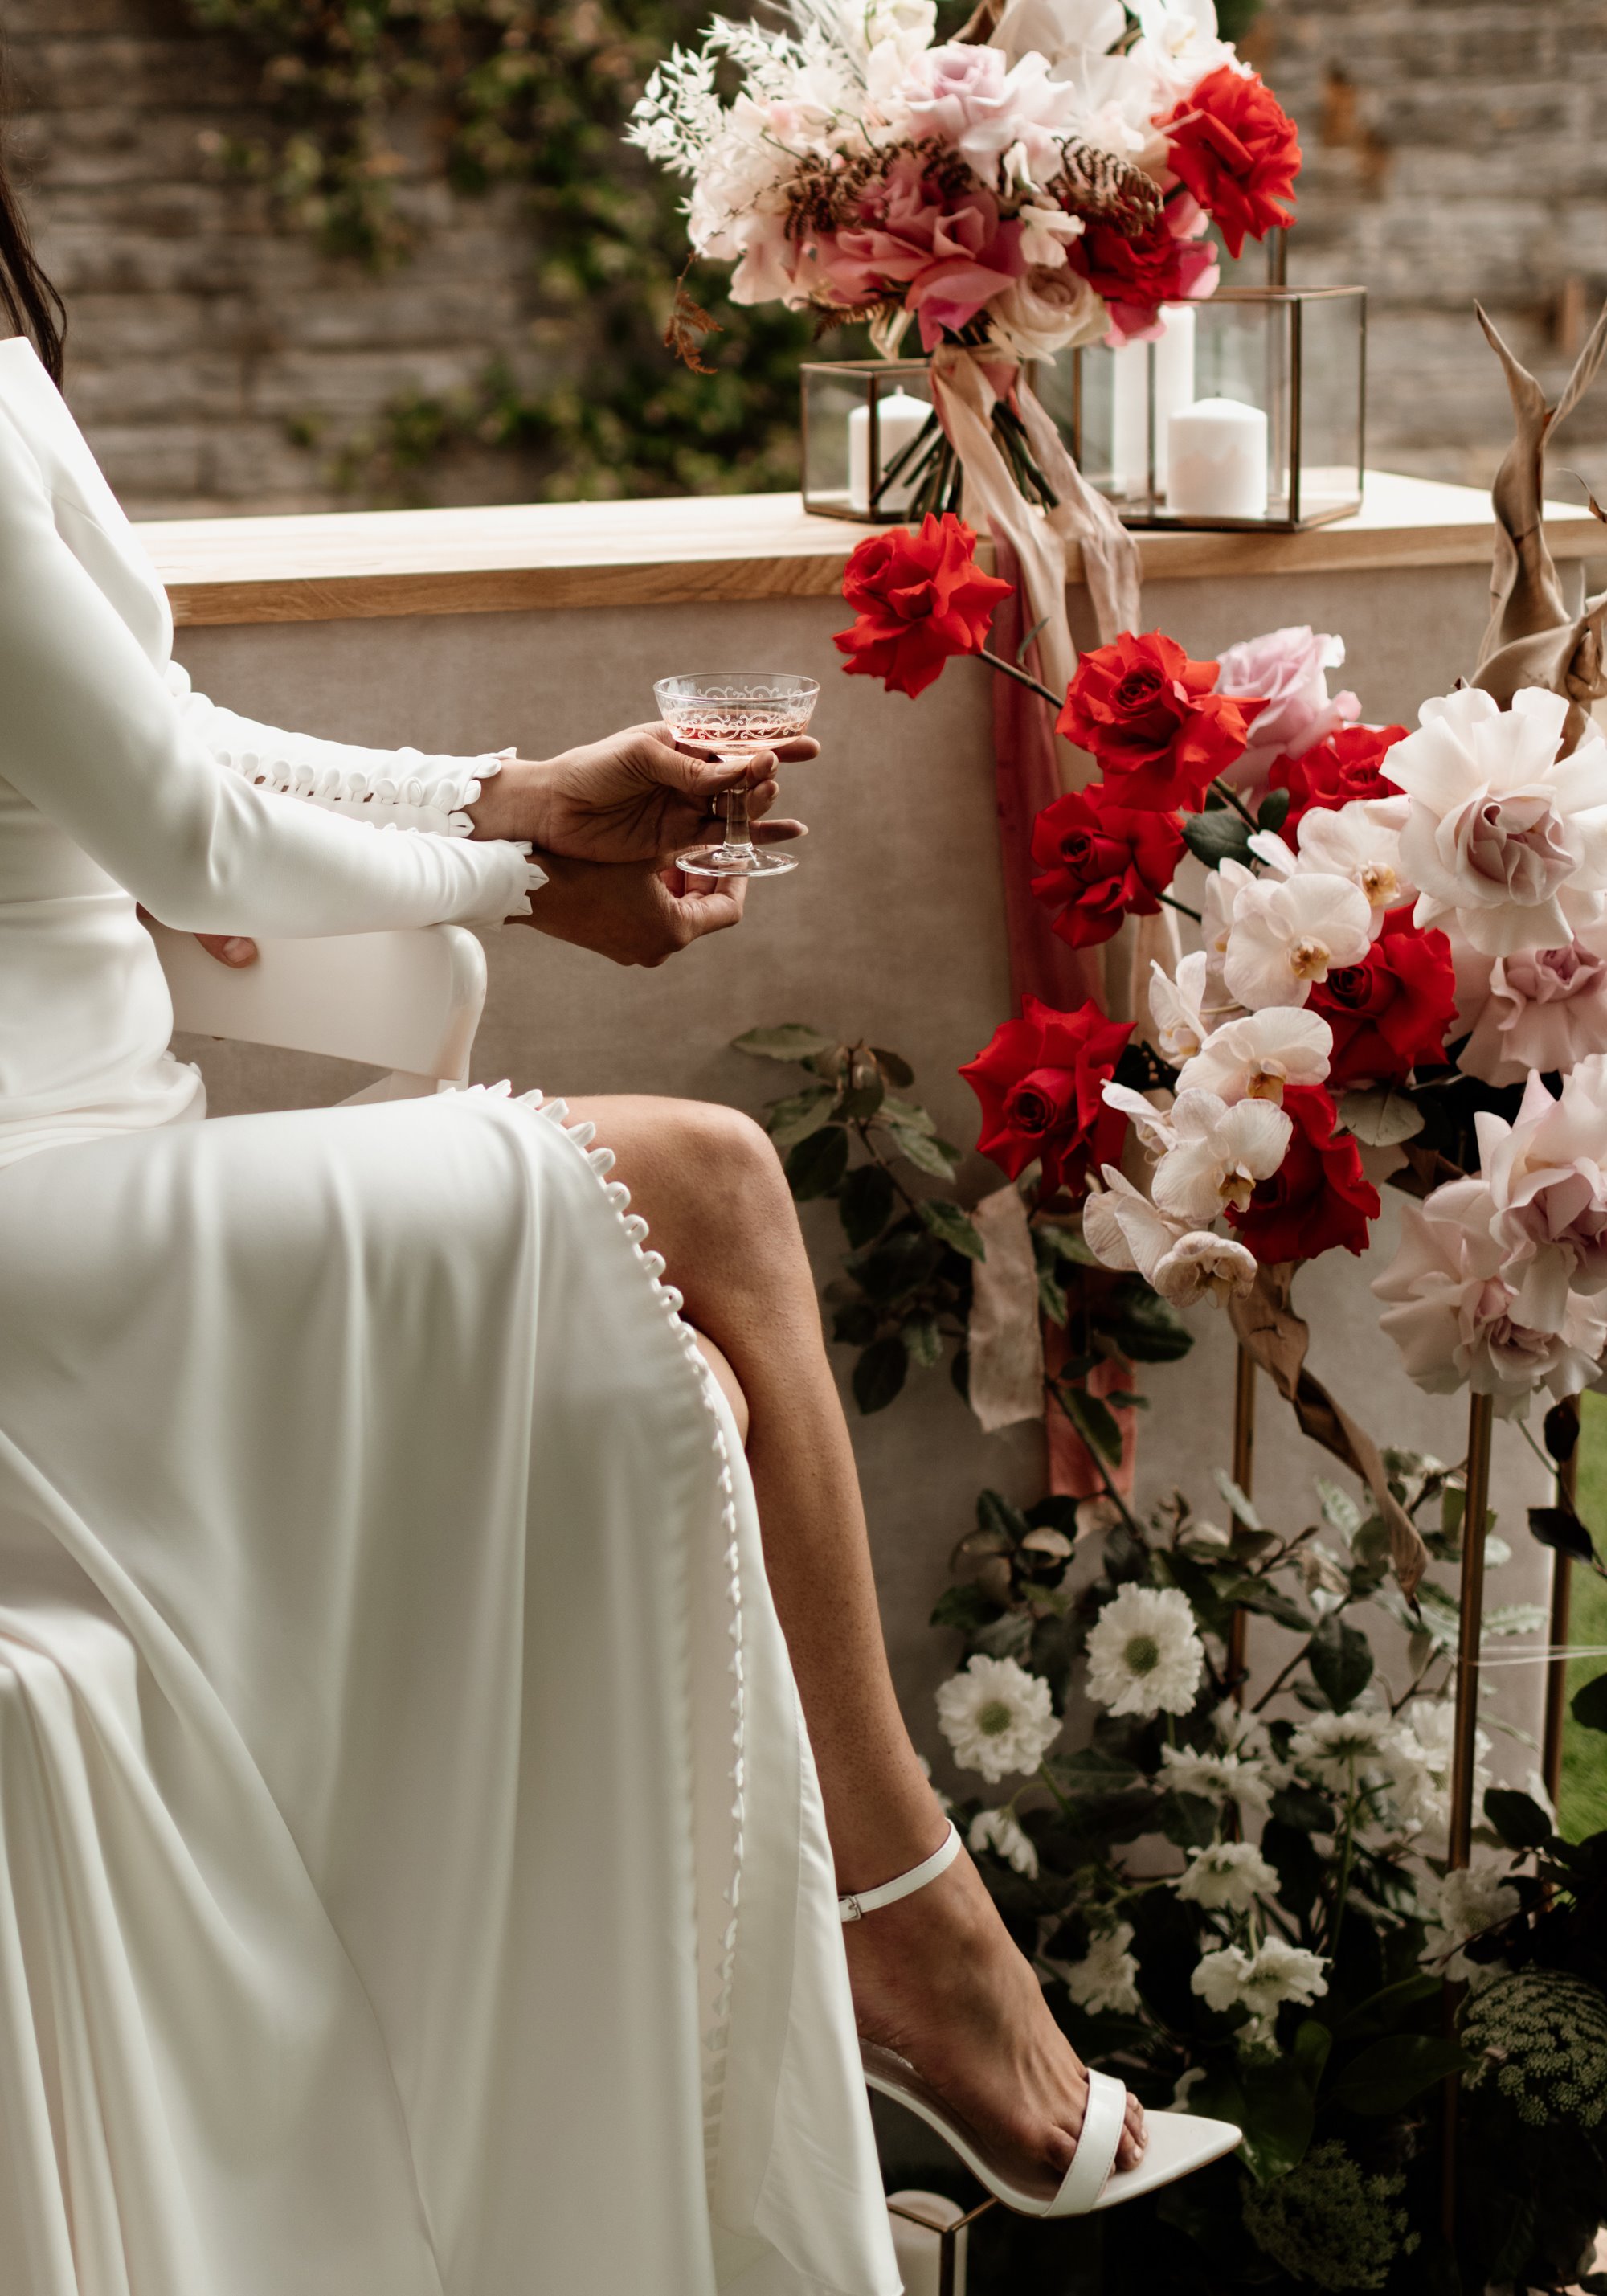 Bride sipping champagne next to a display or red, pink and white wedding flowers